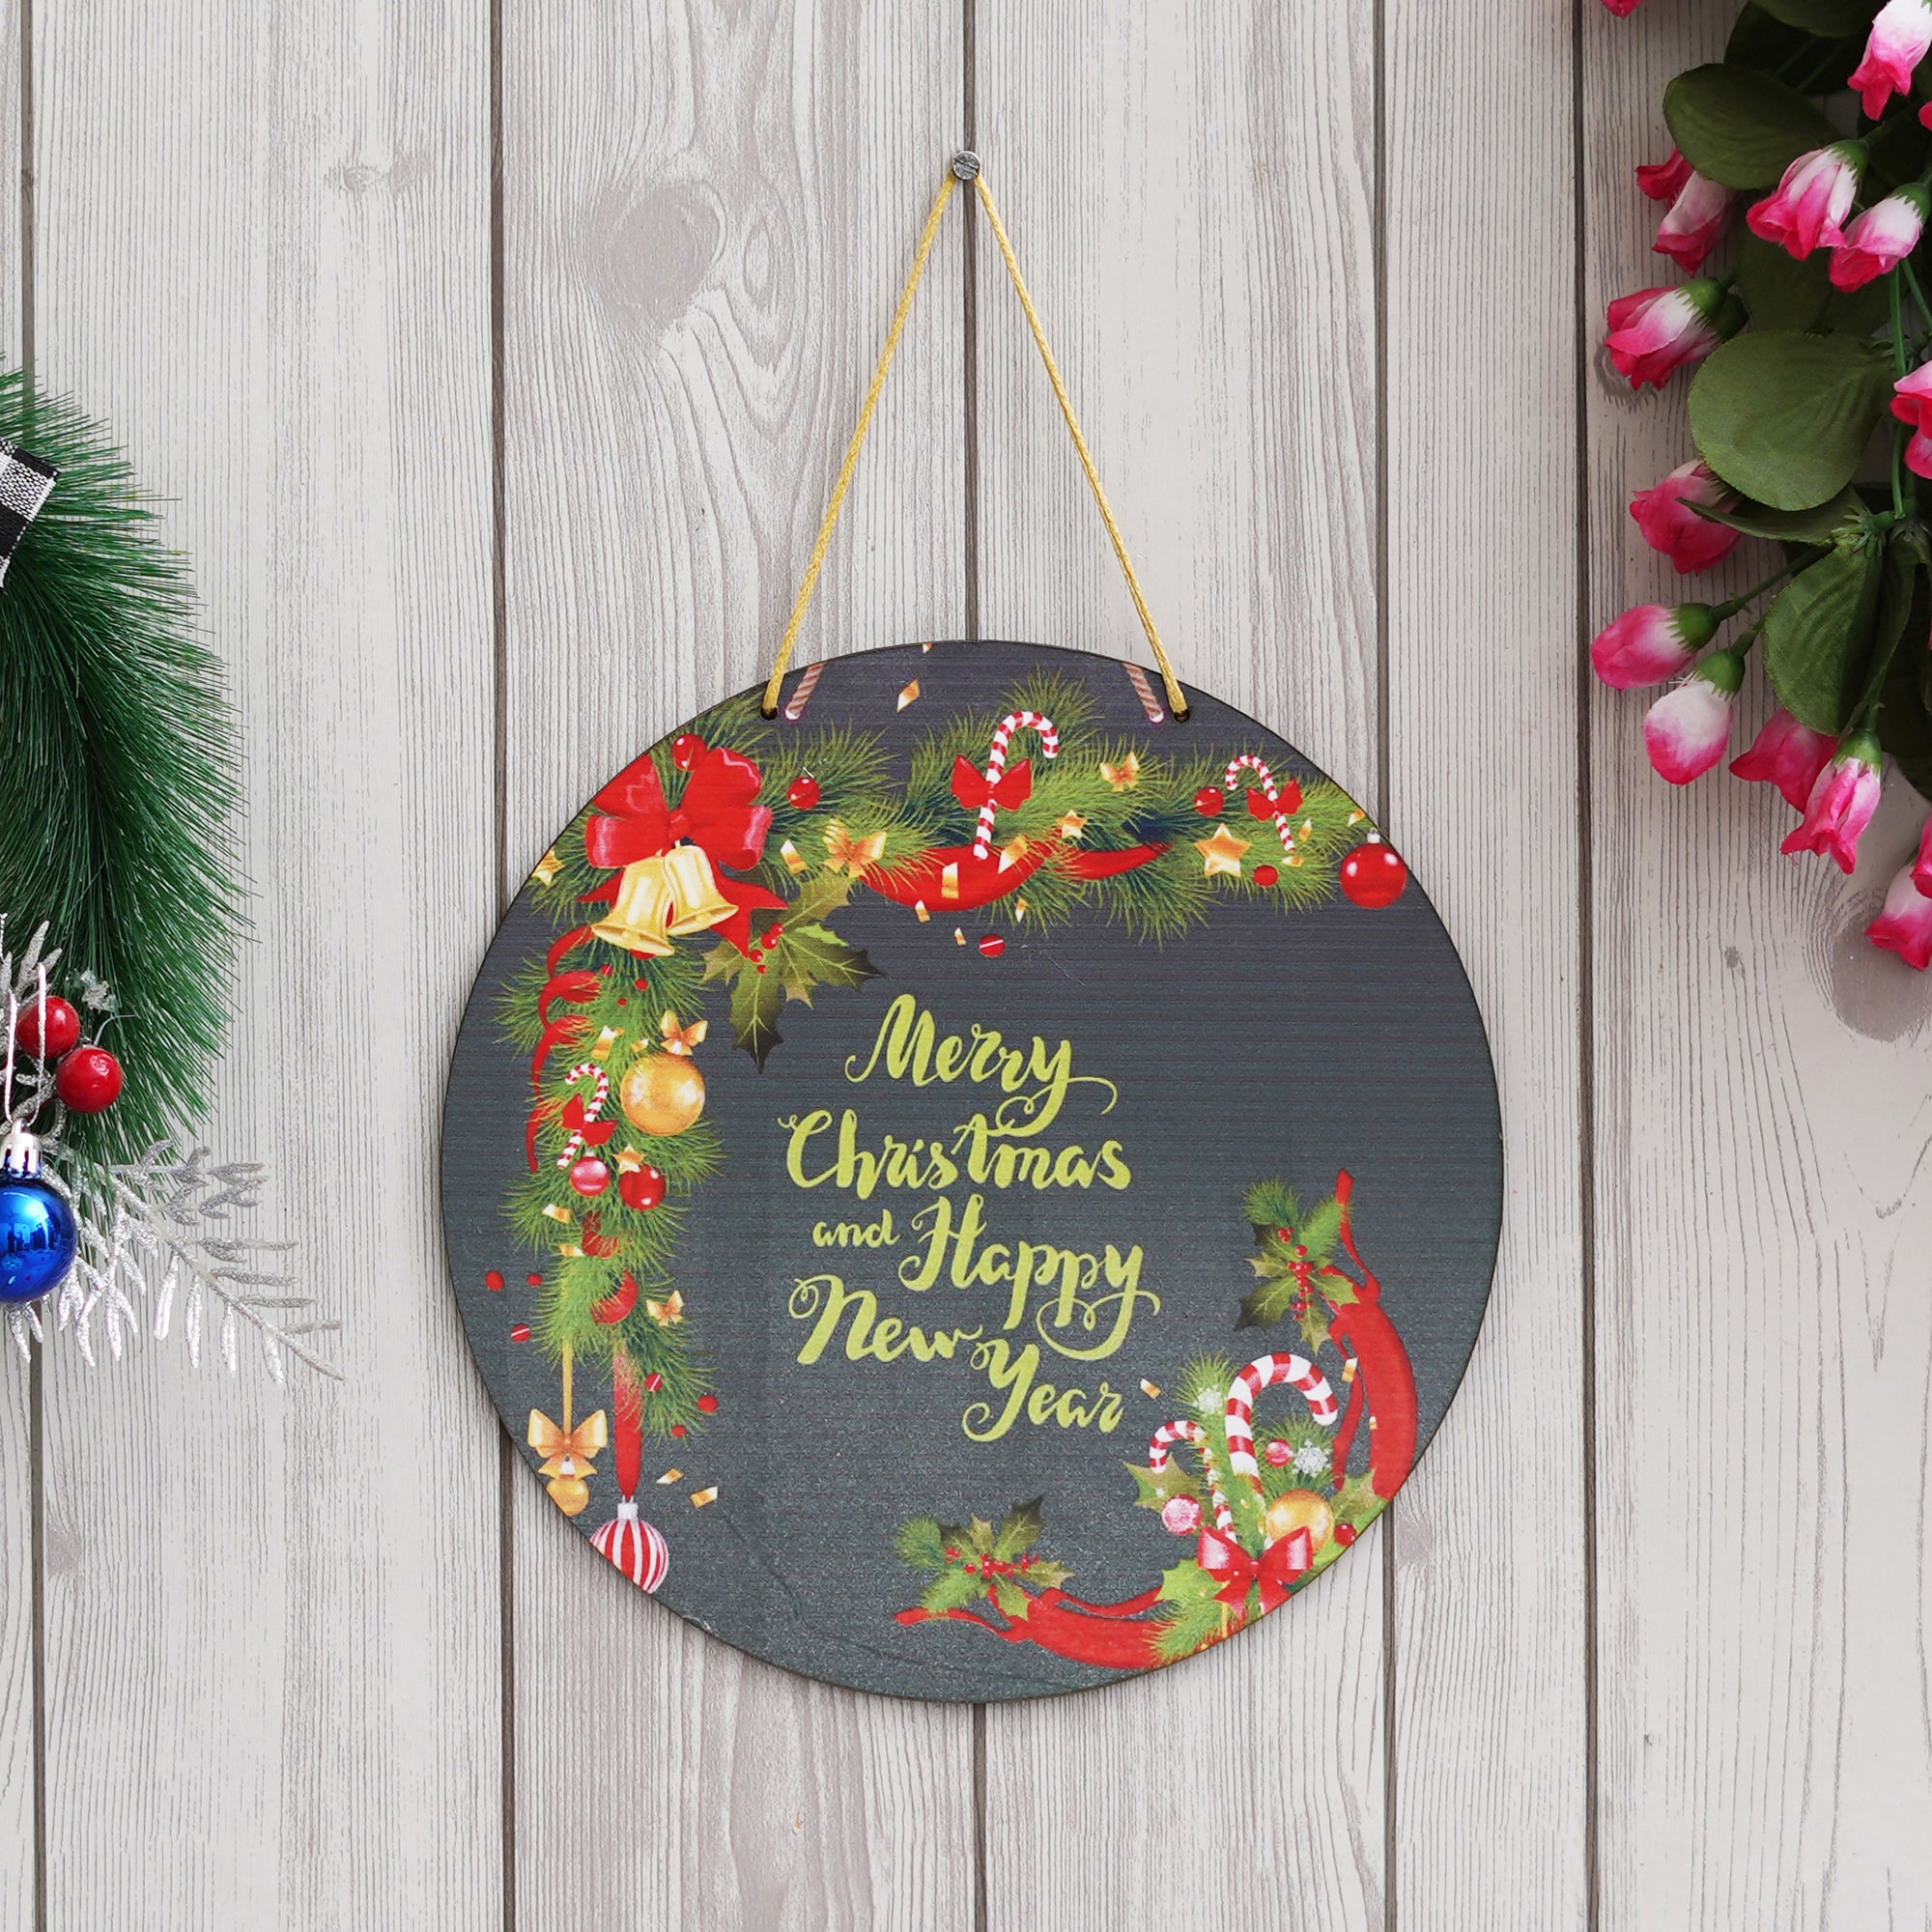 eCraftIndia "Merry Christmas and Happy New Year" Printed Wall/Door Hanging for Home and Christmas Decorations (Green, Red, Golden) 1